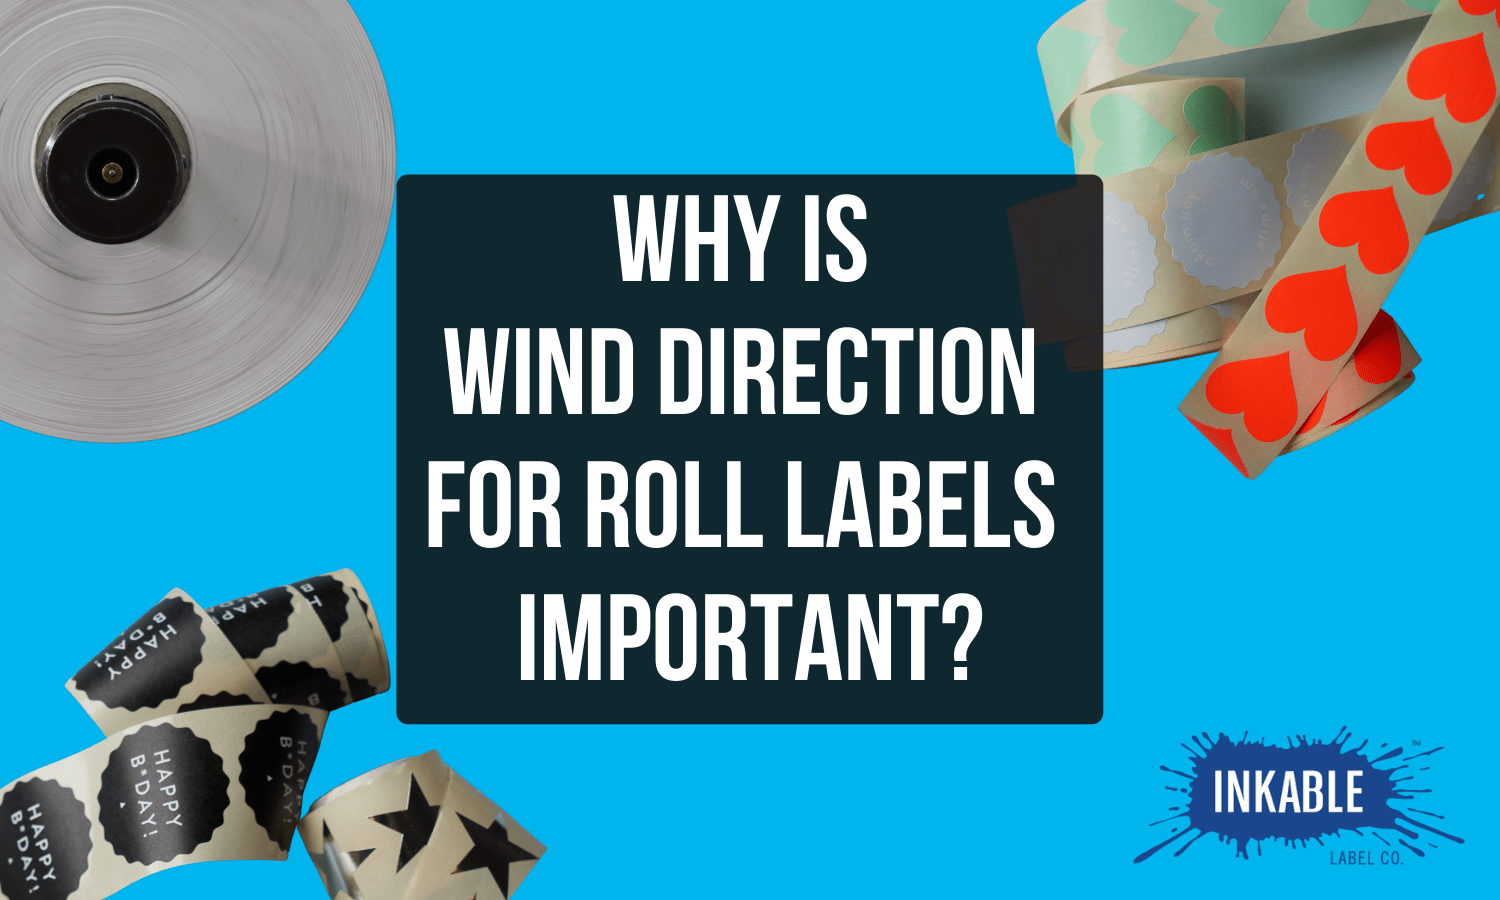 Why Is Wind Direction For Roll Labels Important?